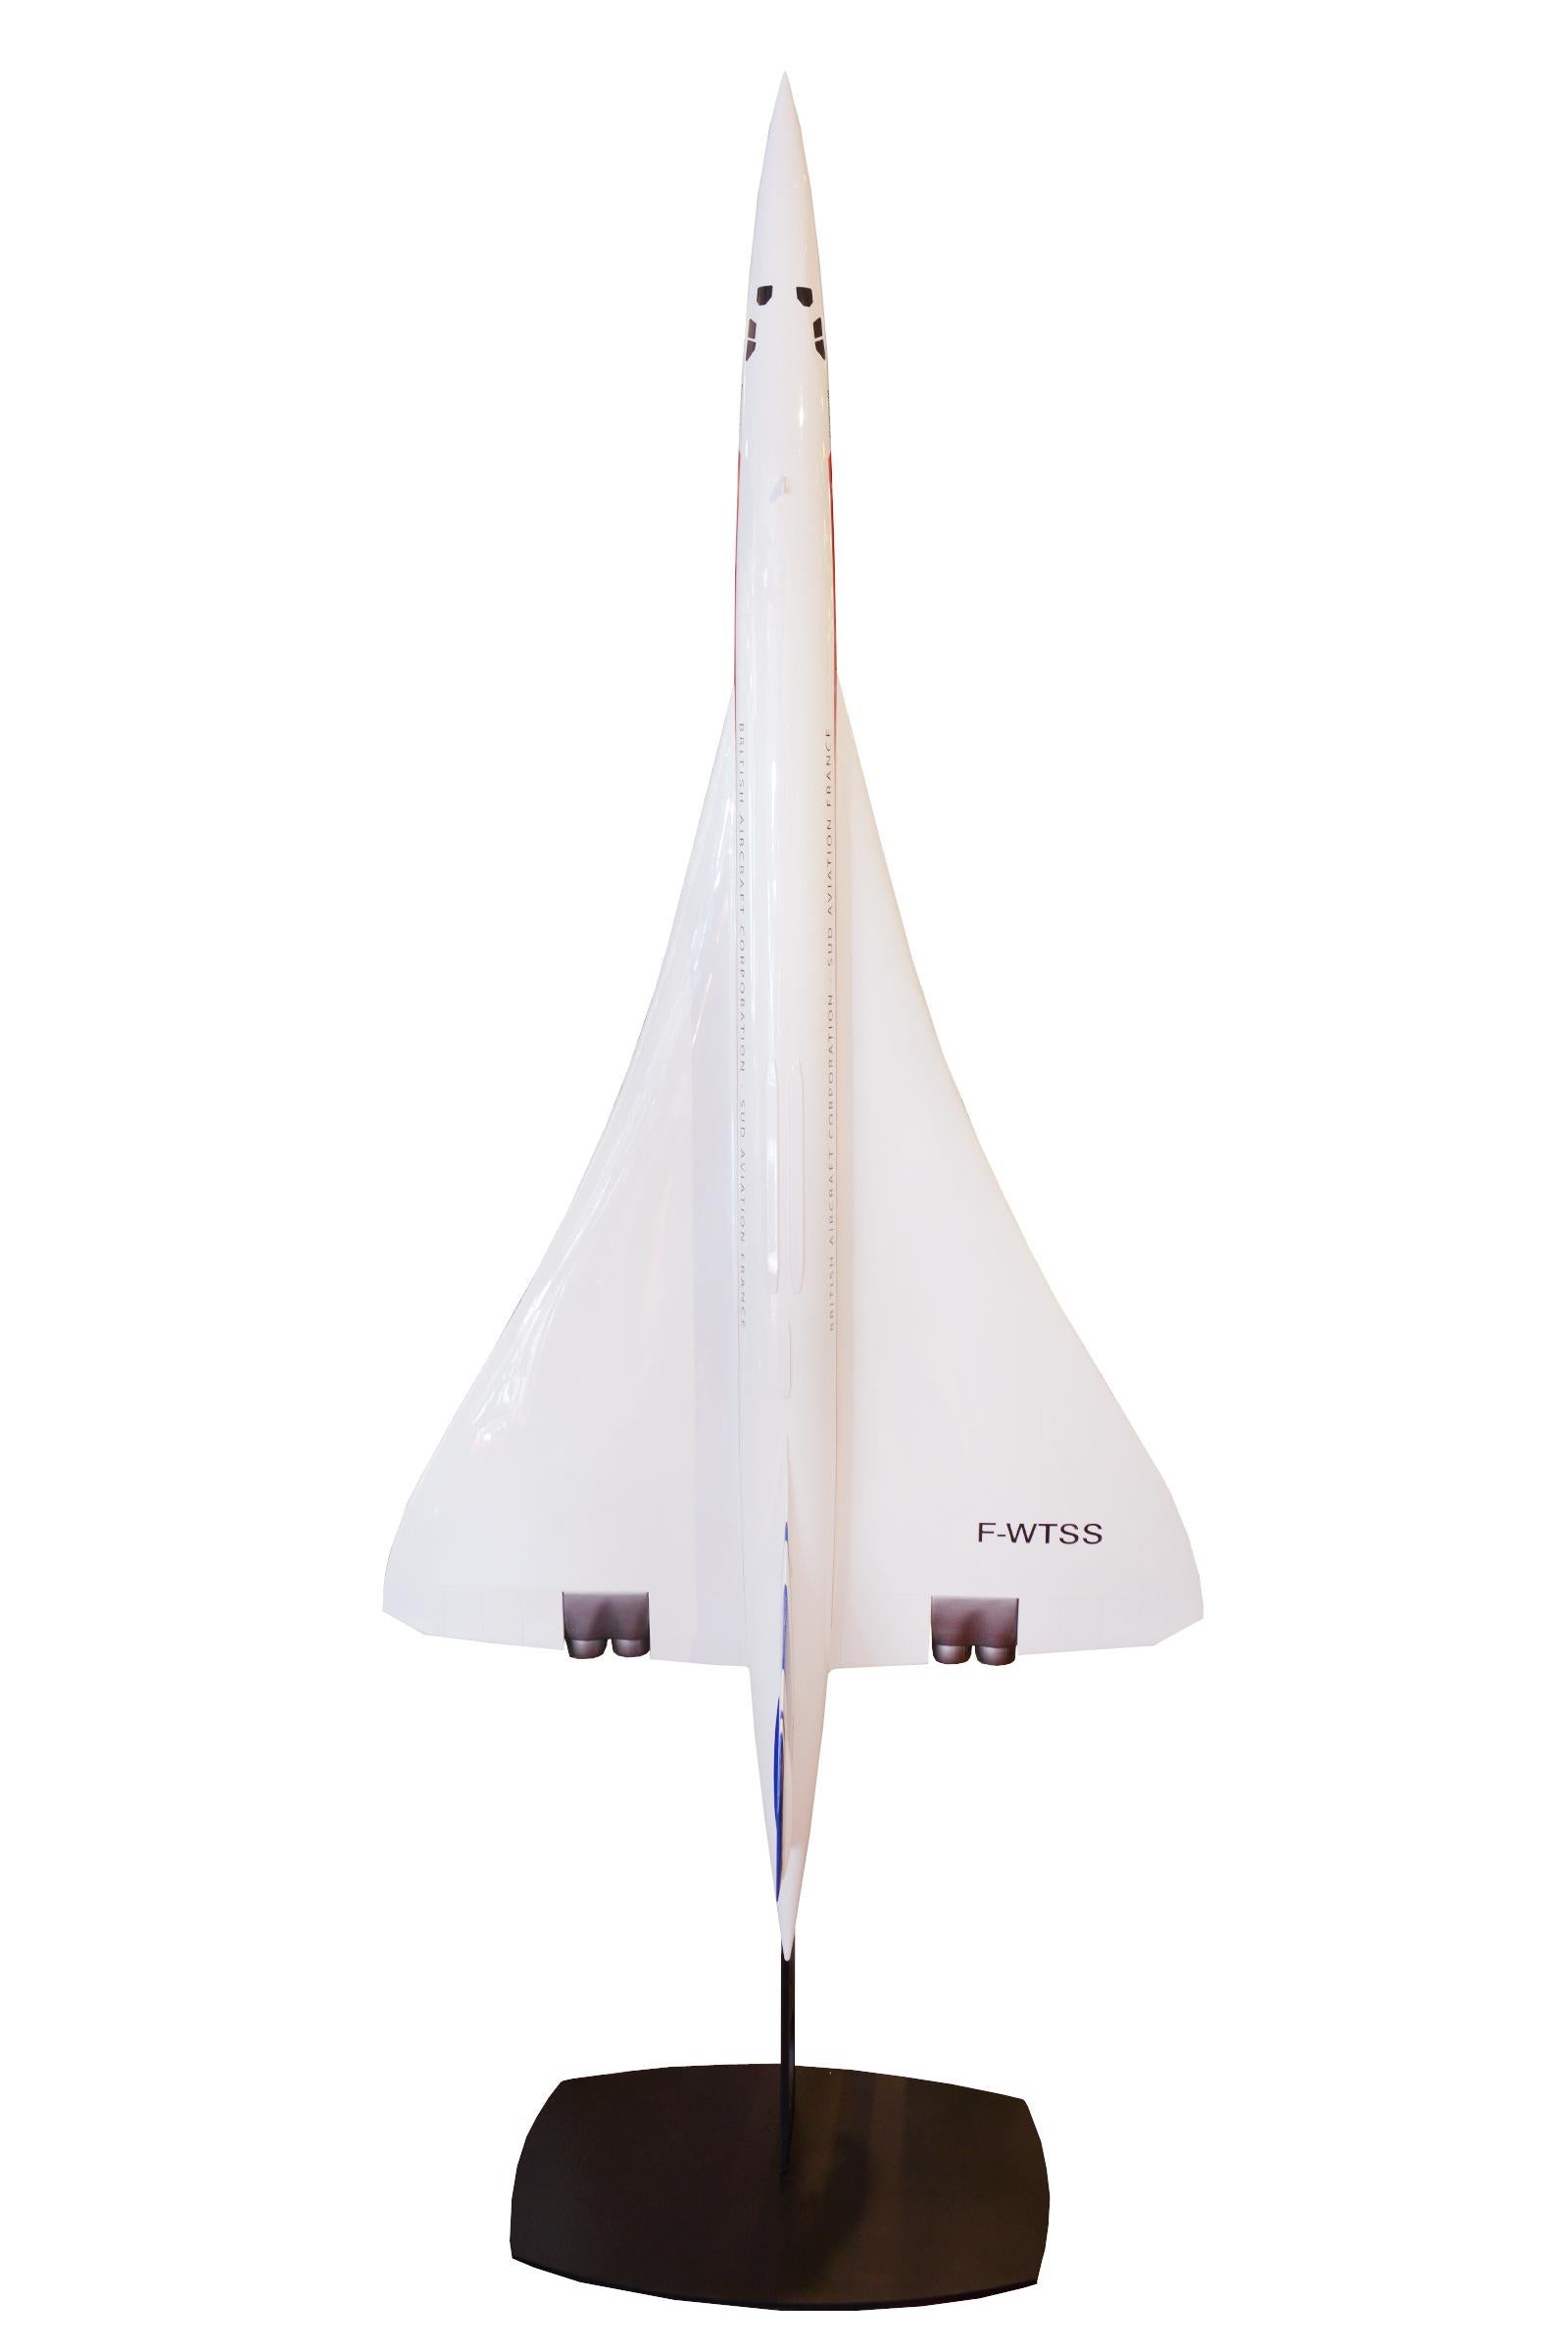 Sculpture Concorde model in high quality resin,
scale 1/25. Vertical base in blackened steel.
Exceptional piece. Made in France.
Base: L 71 x D 55cm.
Model: Wingspan 100cm x height 290cm.
 